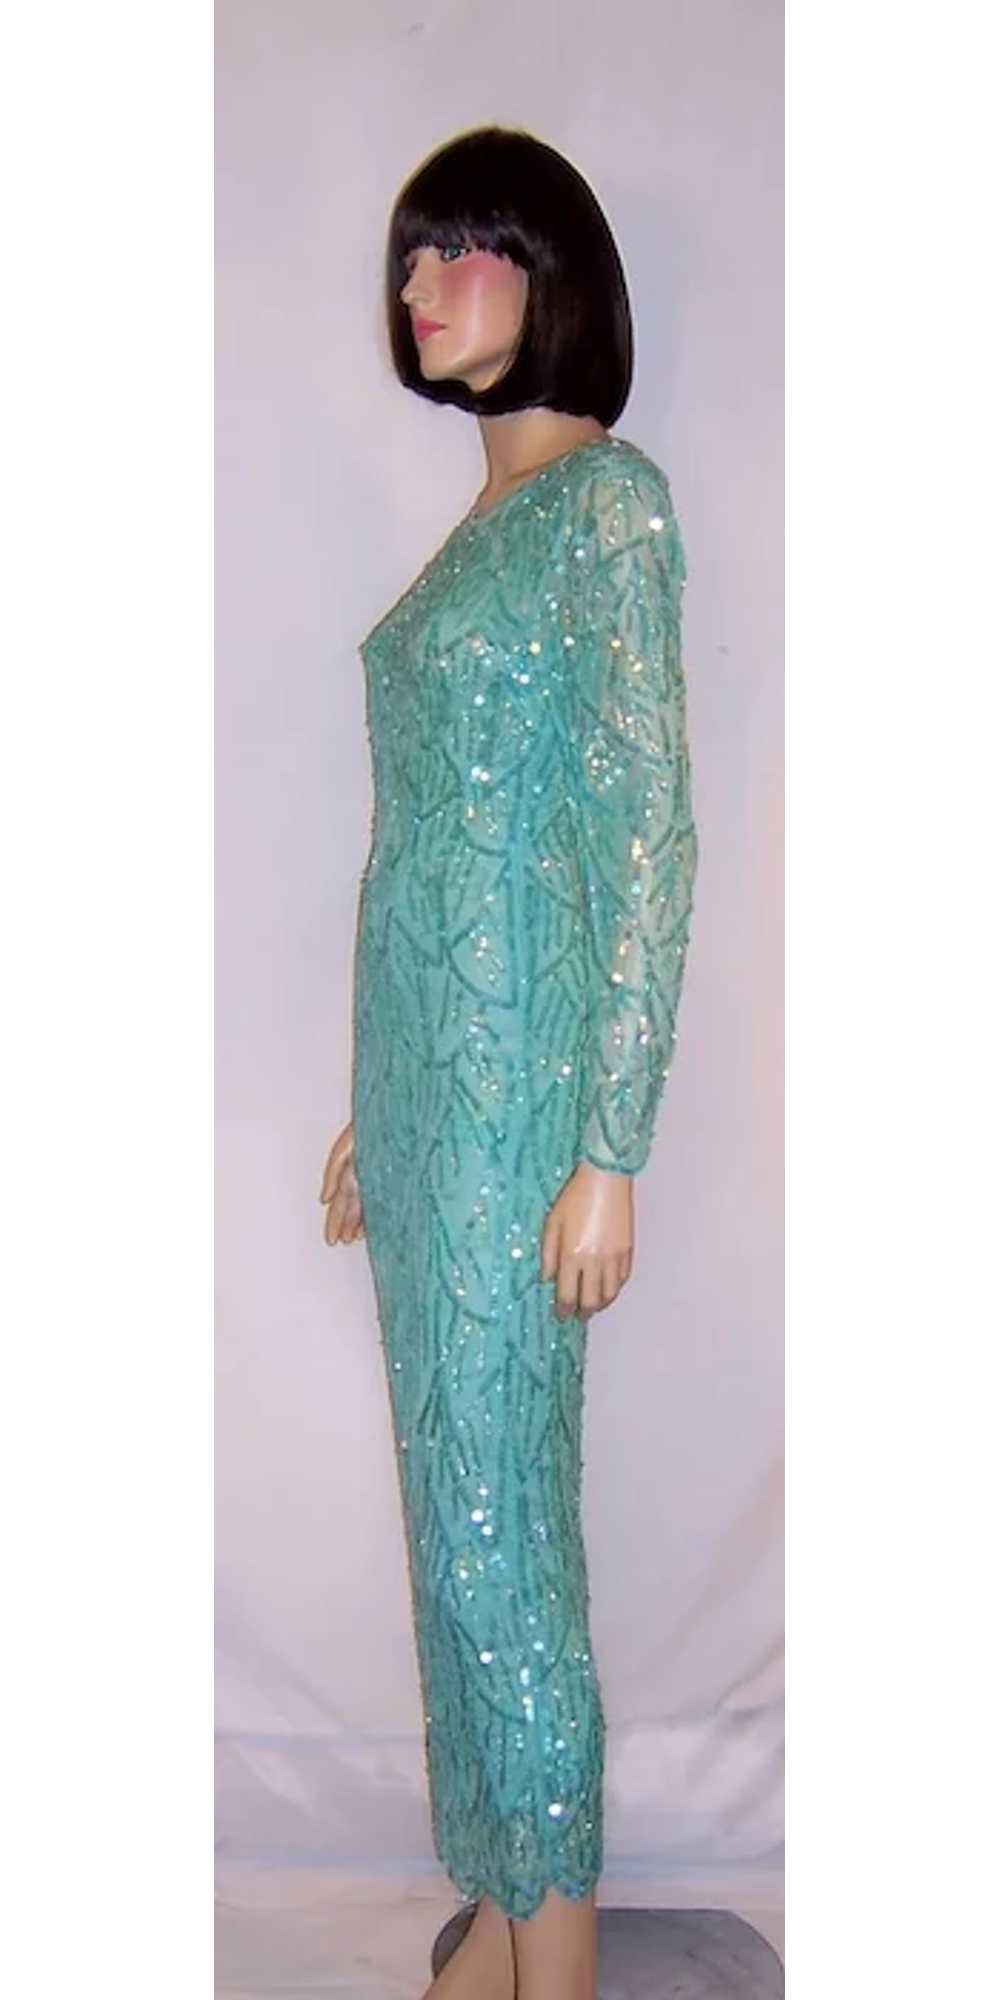 Pale Turquoise Sequined and Beaded Gown - image 4